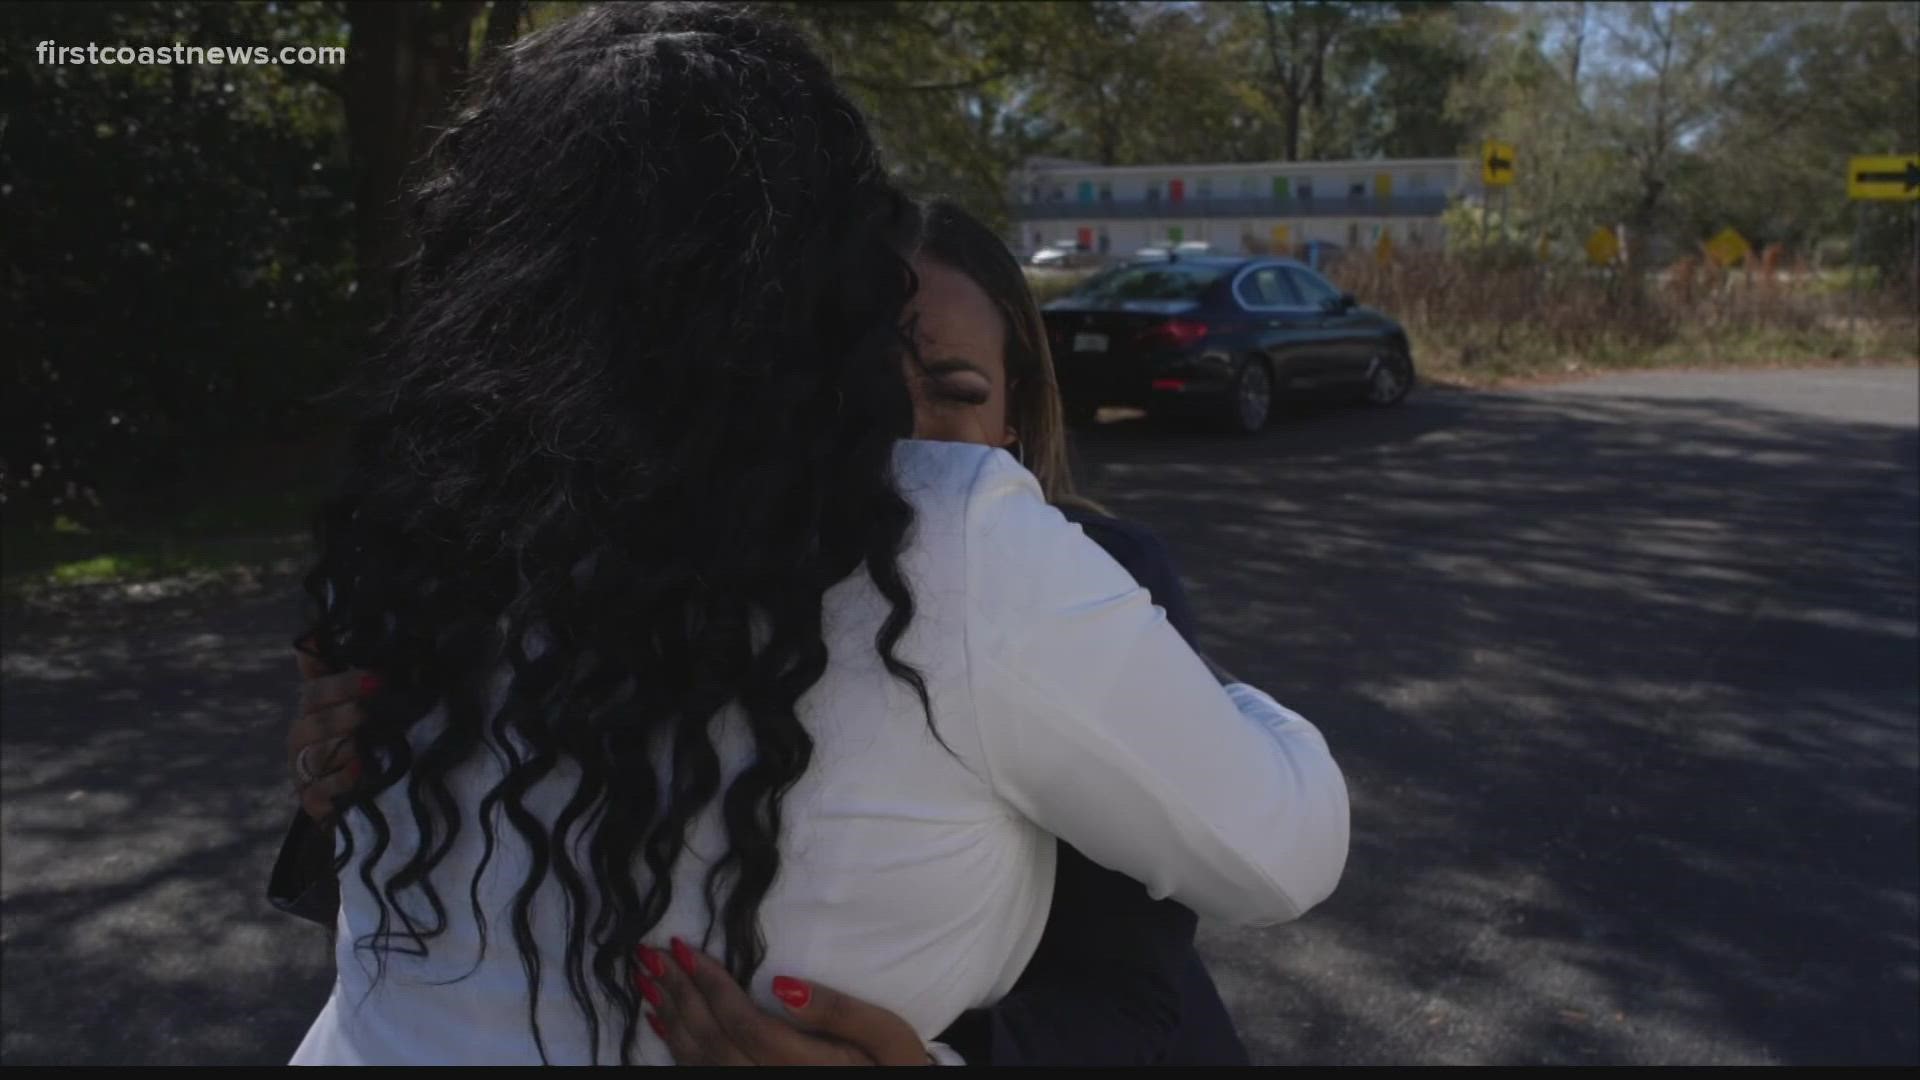 Barely teenagers, the women say they were brought to a motel on Jacksonville's Westside and what happened next is something they will never forget.